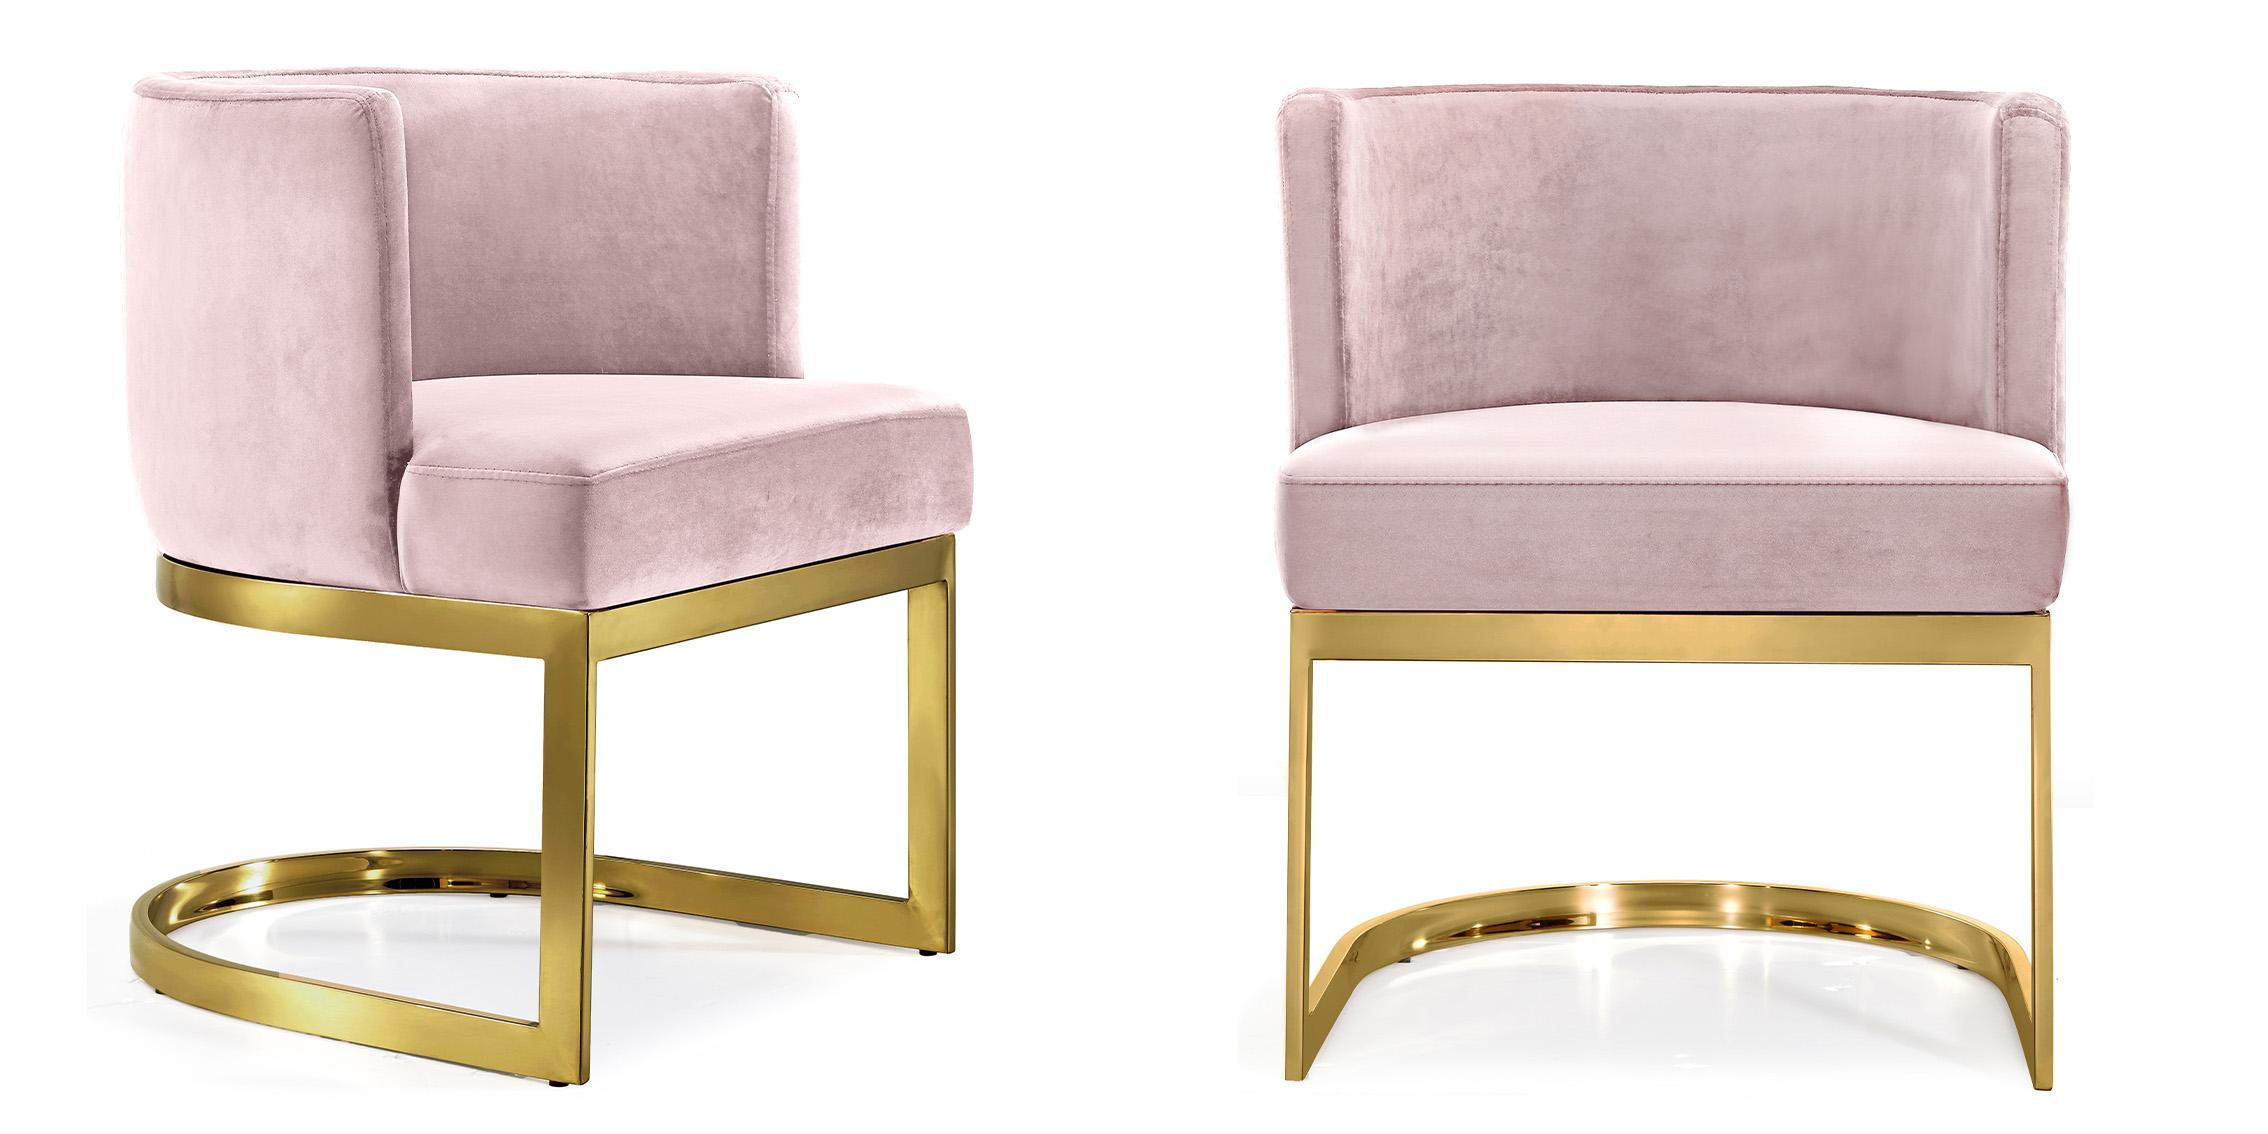 Contemporary, Modern Dining Chair Set Gianna 718Pink-C 718Pink-C-Set-2 in Pink, Gold Velvet